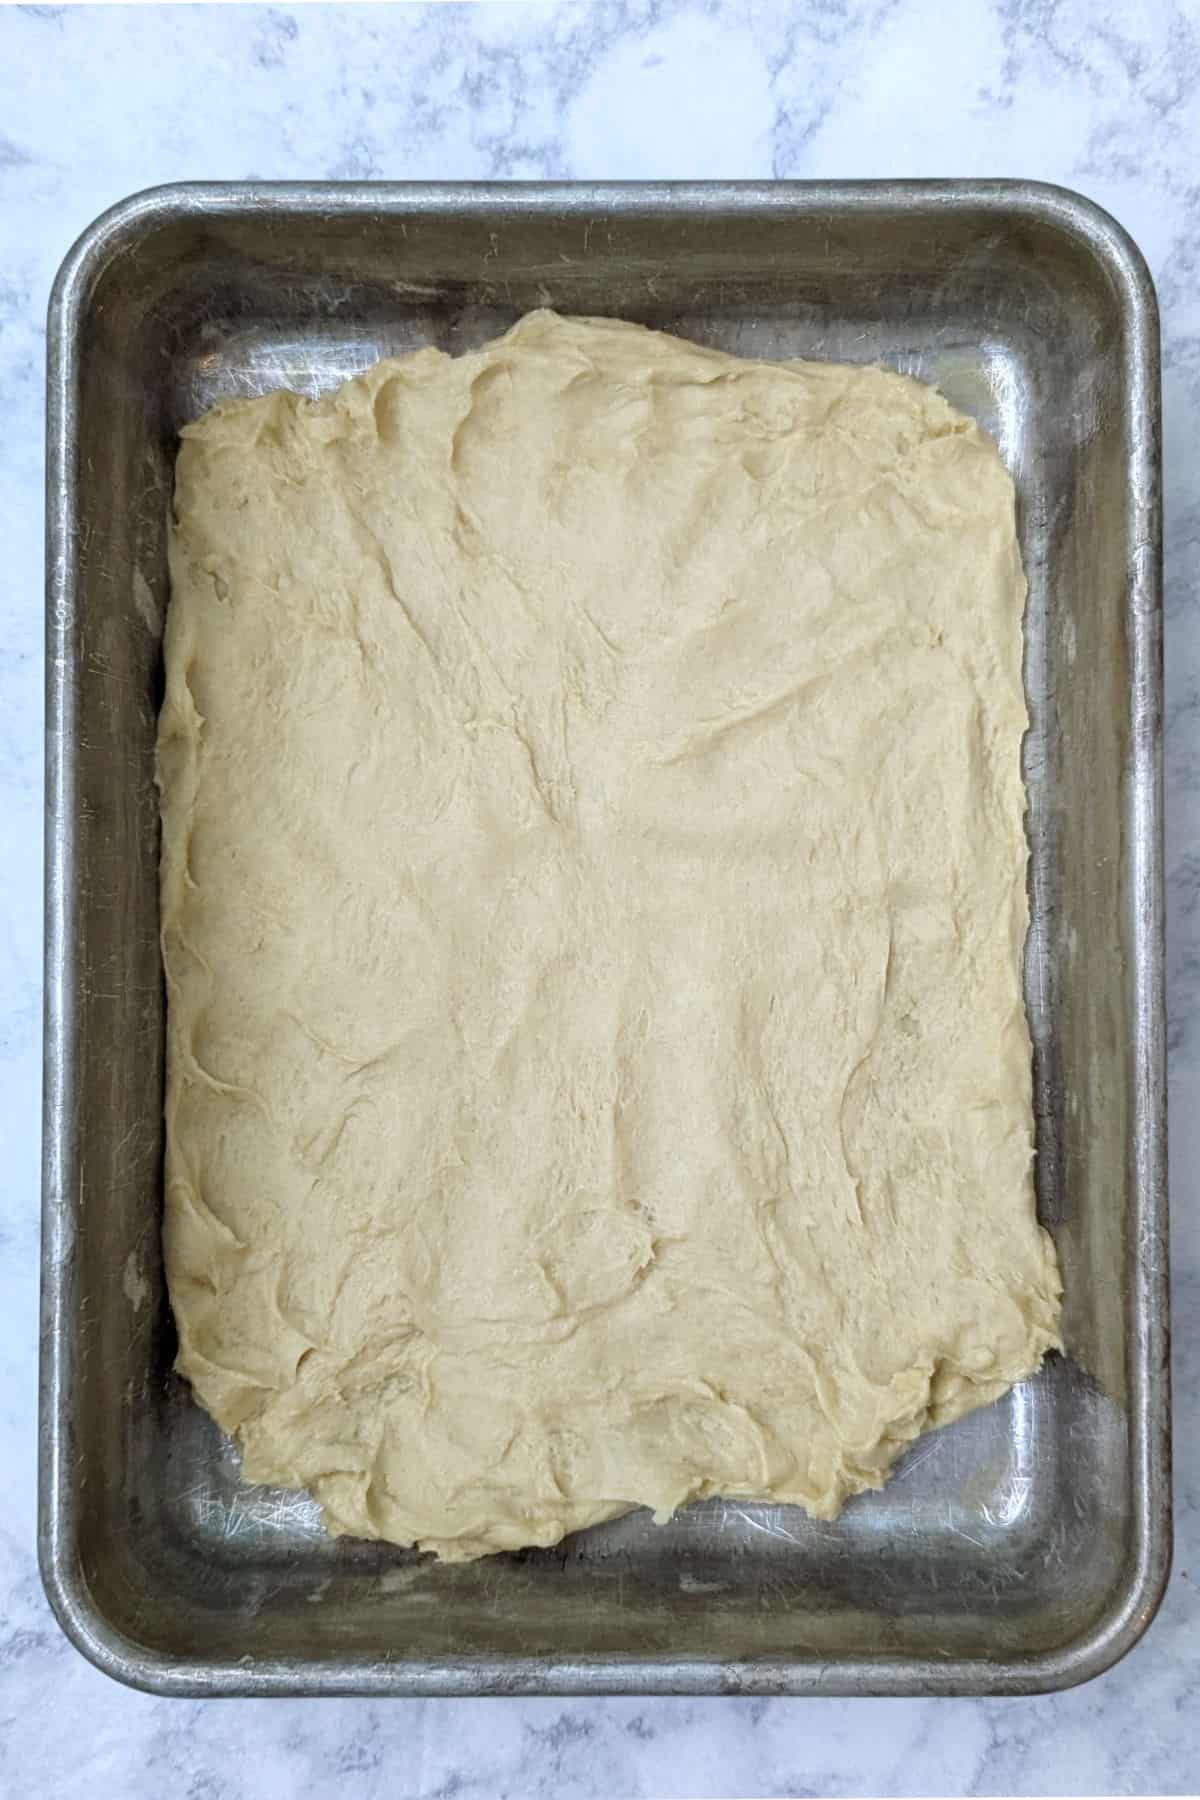 dough patted close to, but not up to, the edges of a 9x13 inch pan